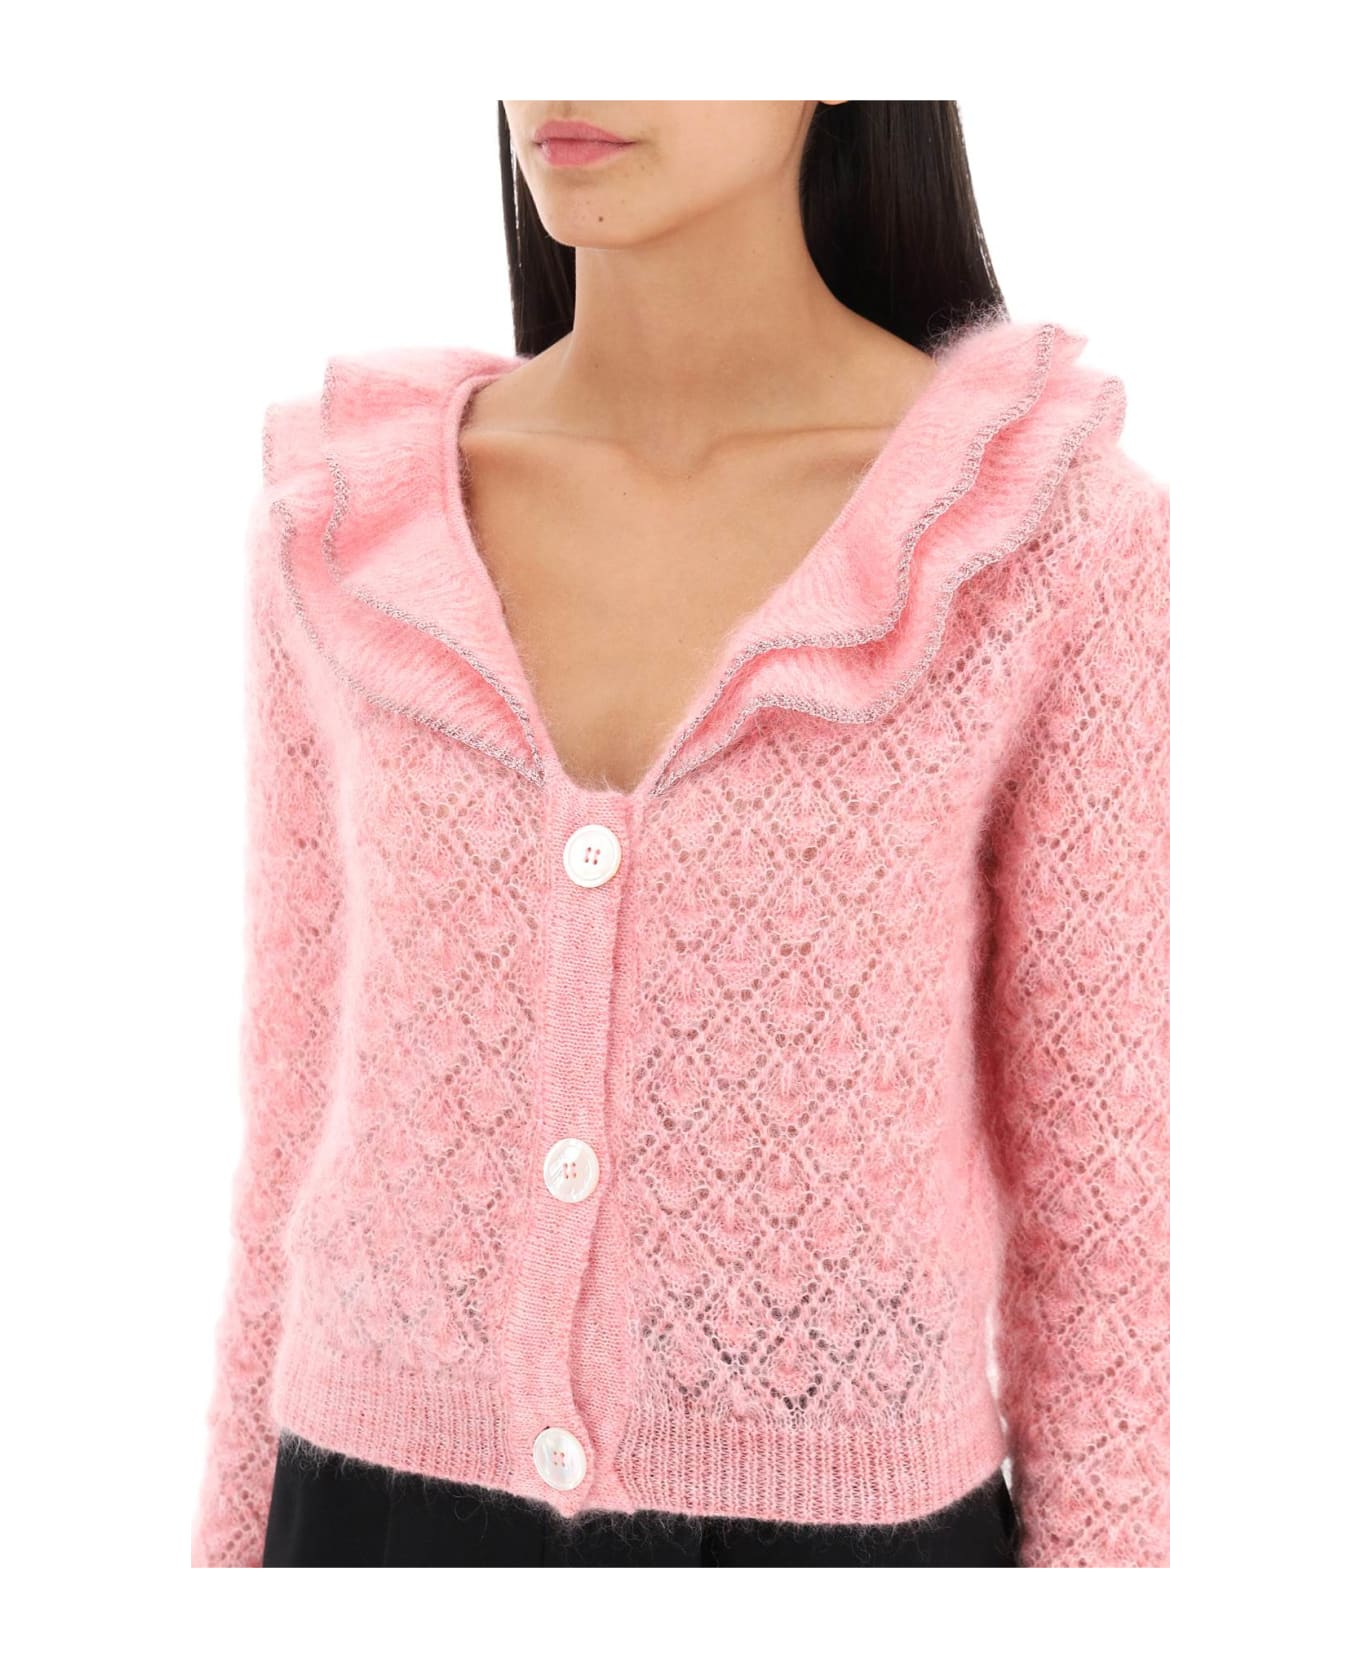 Alessandra Rich Cropped Cardigan With Frills - PINK MELANGE (Pink)